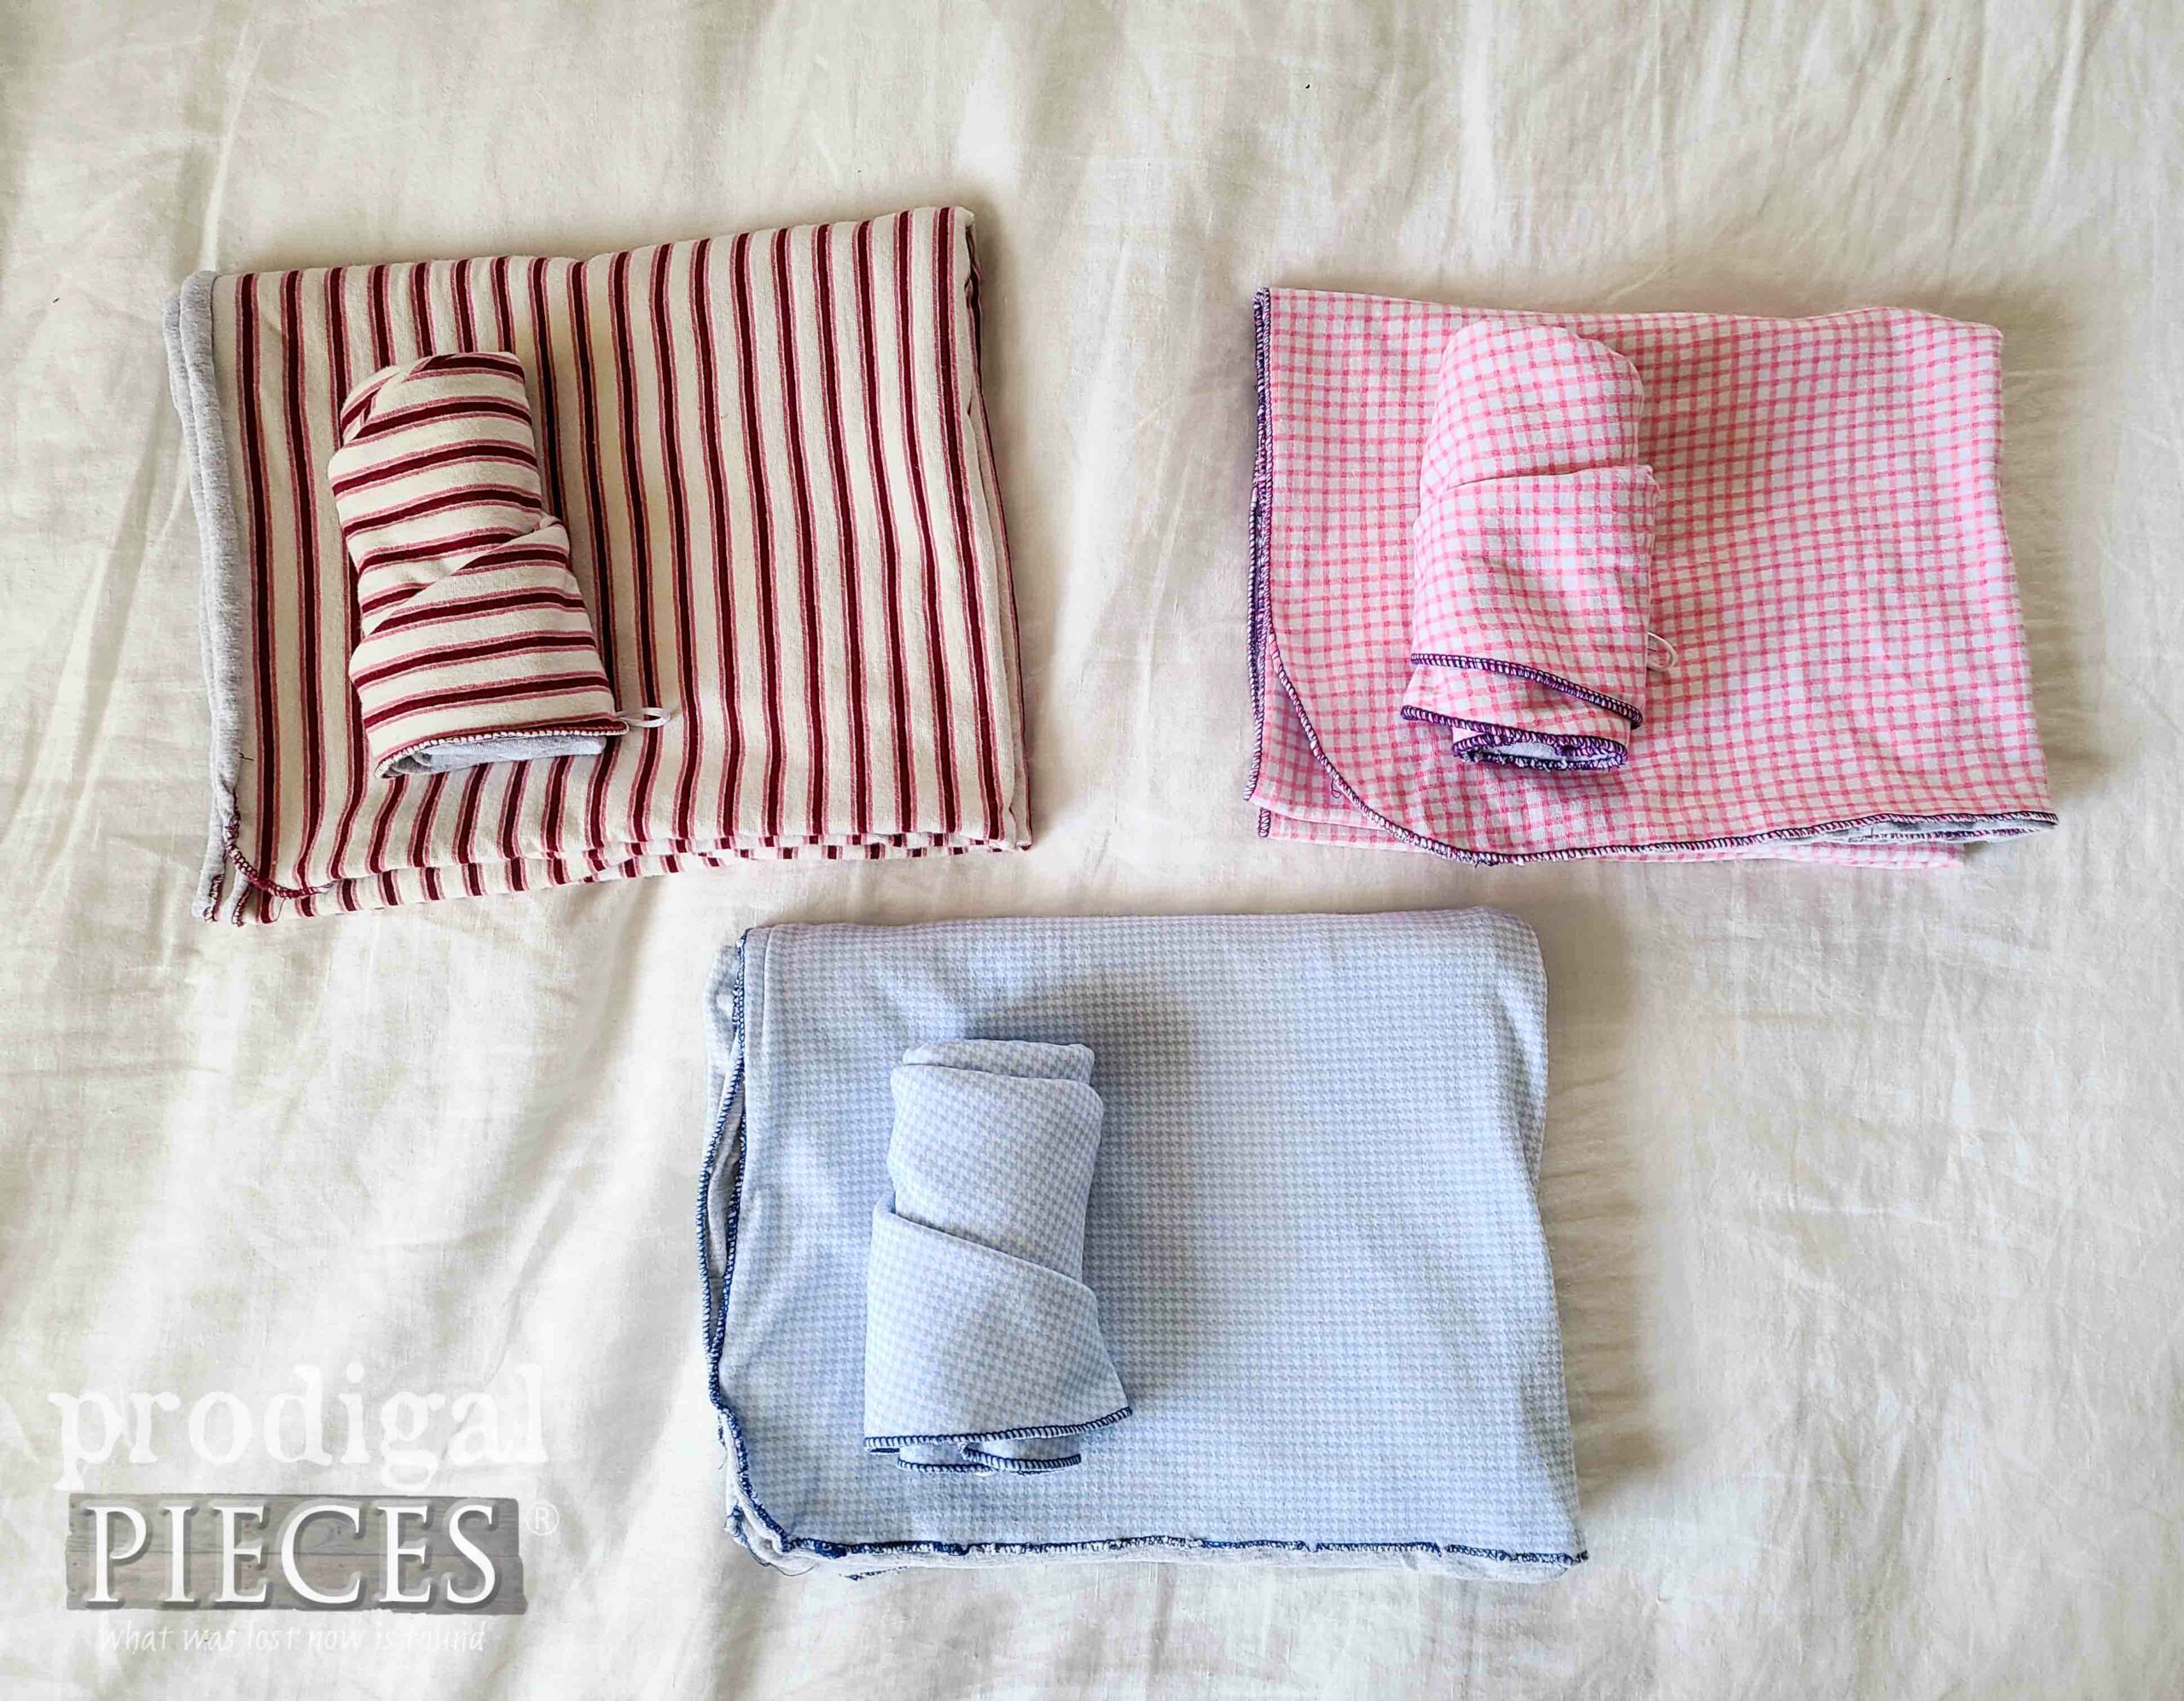 DIY Hair Towel Set for Gifts from Refashioned Fabrics by Larissa of Prodigal Pieces for Wavy Hair Girl Haircare | prodigalpieces.com #prodigalpieces